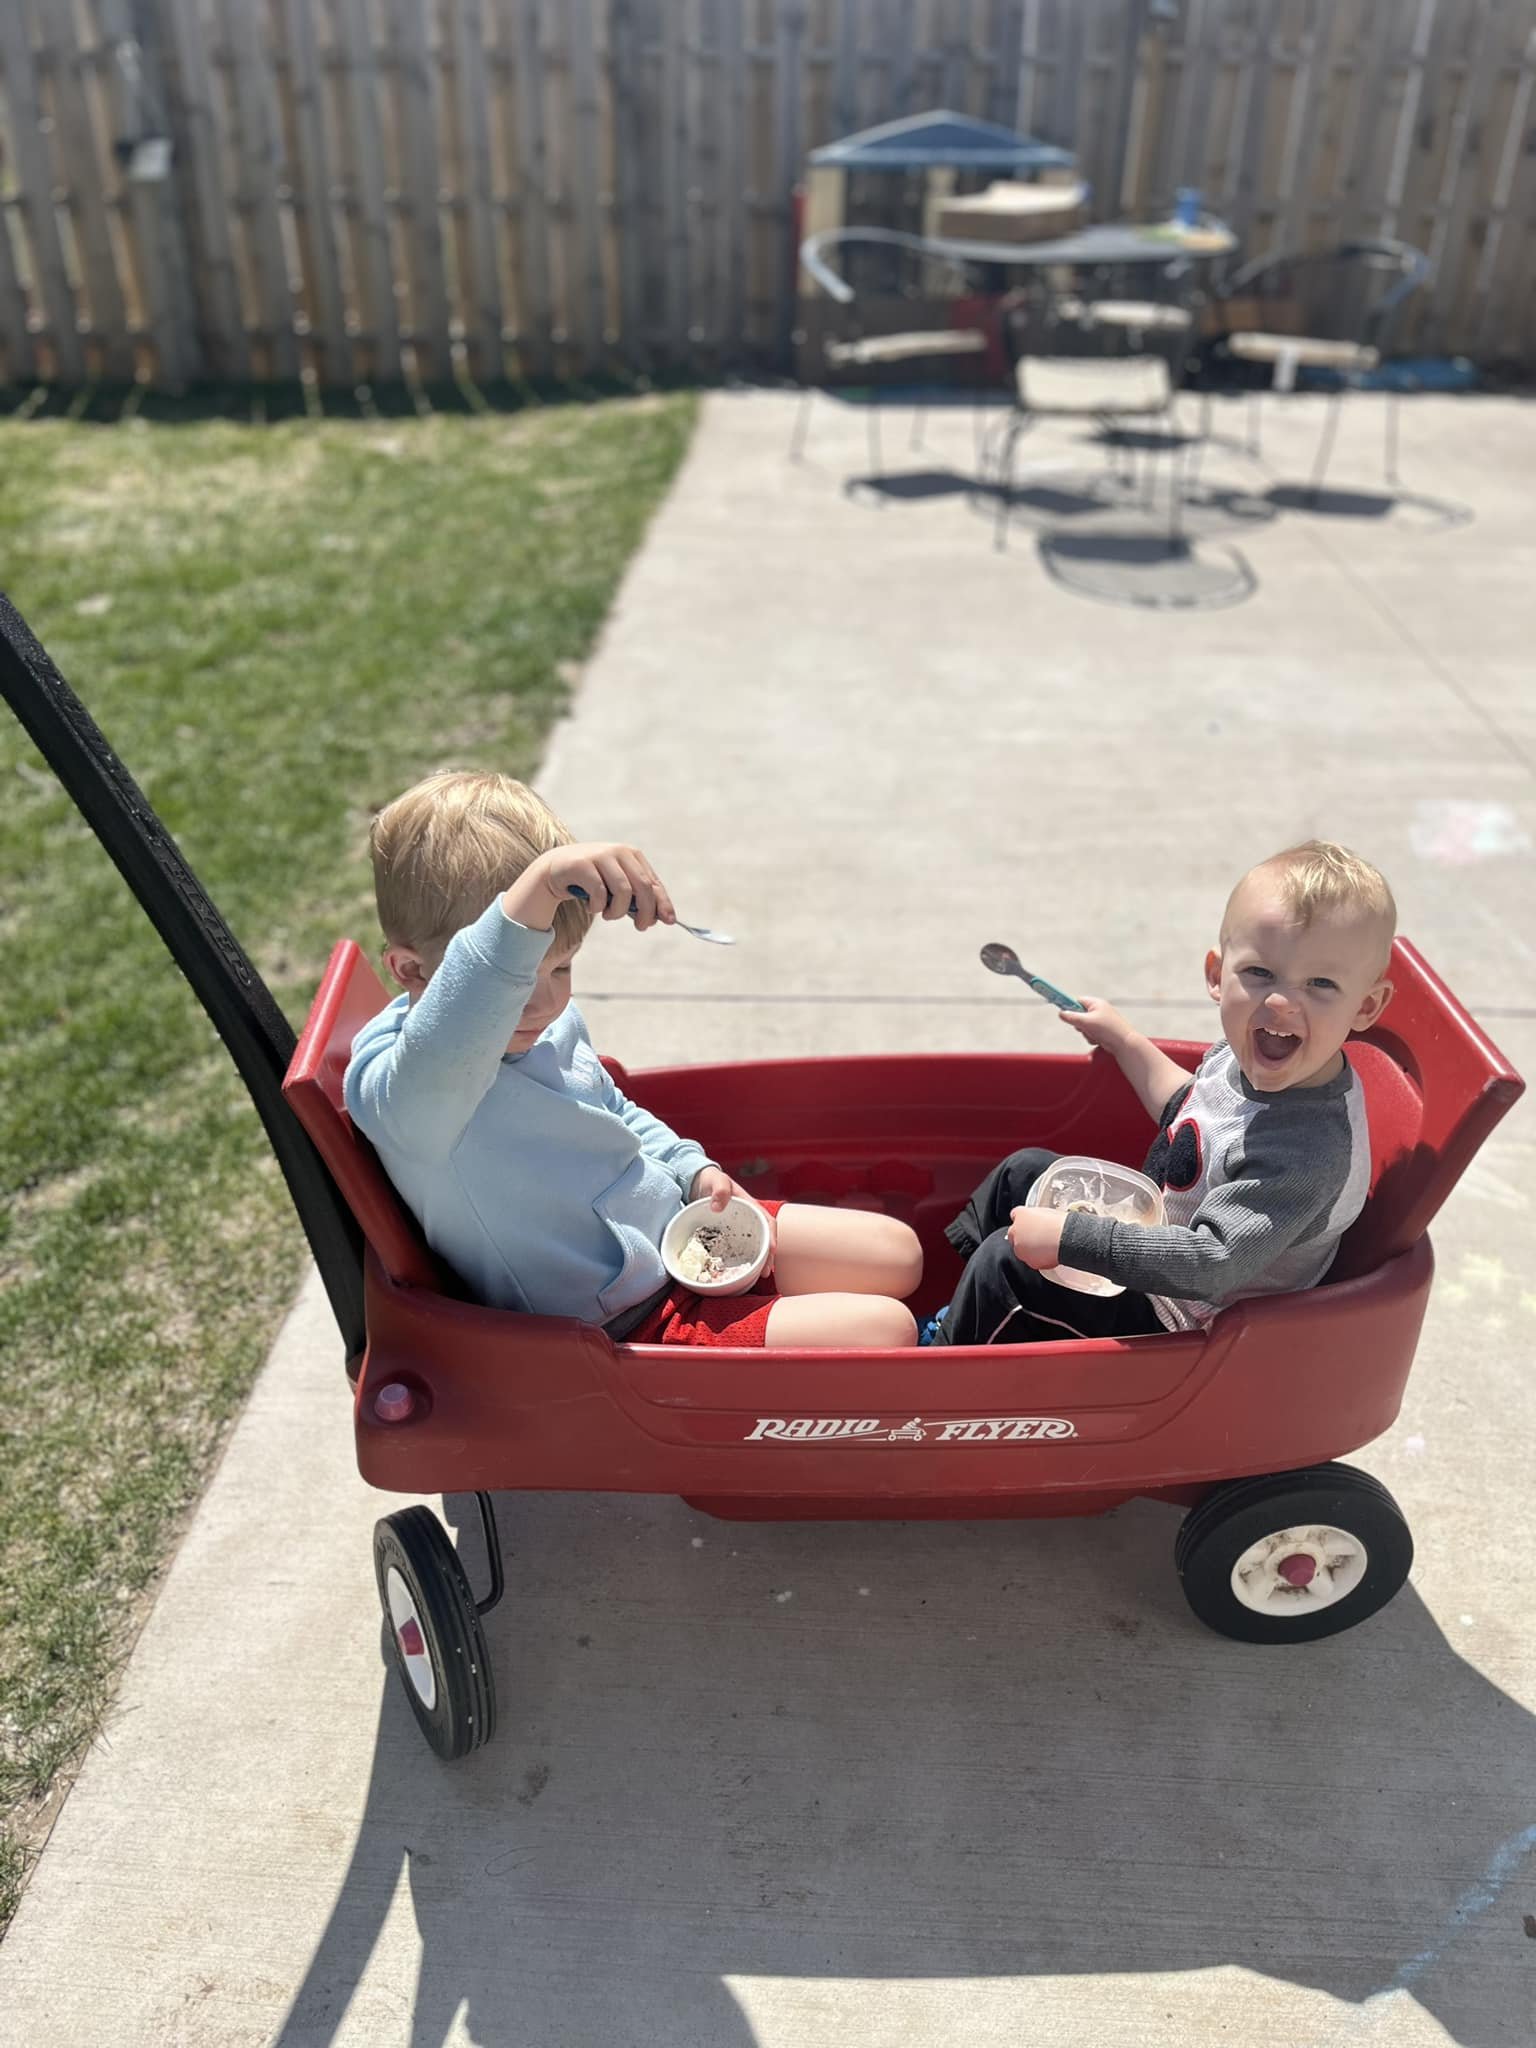 Radio Flyer Wagon, Ice Cream &amp; Sunshine. 

What more could two little guys want?! ❤️❤️